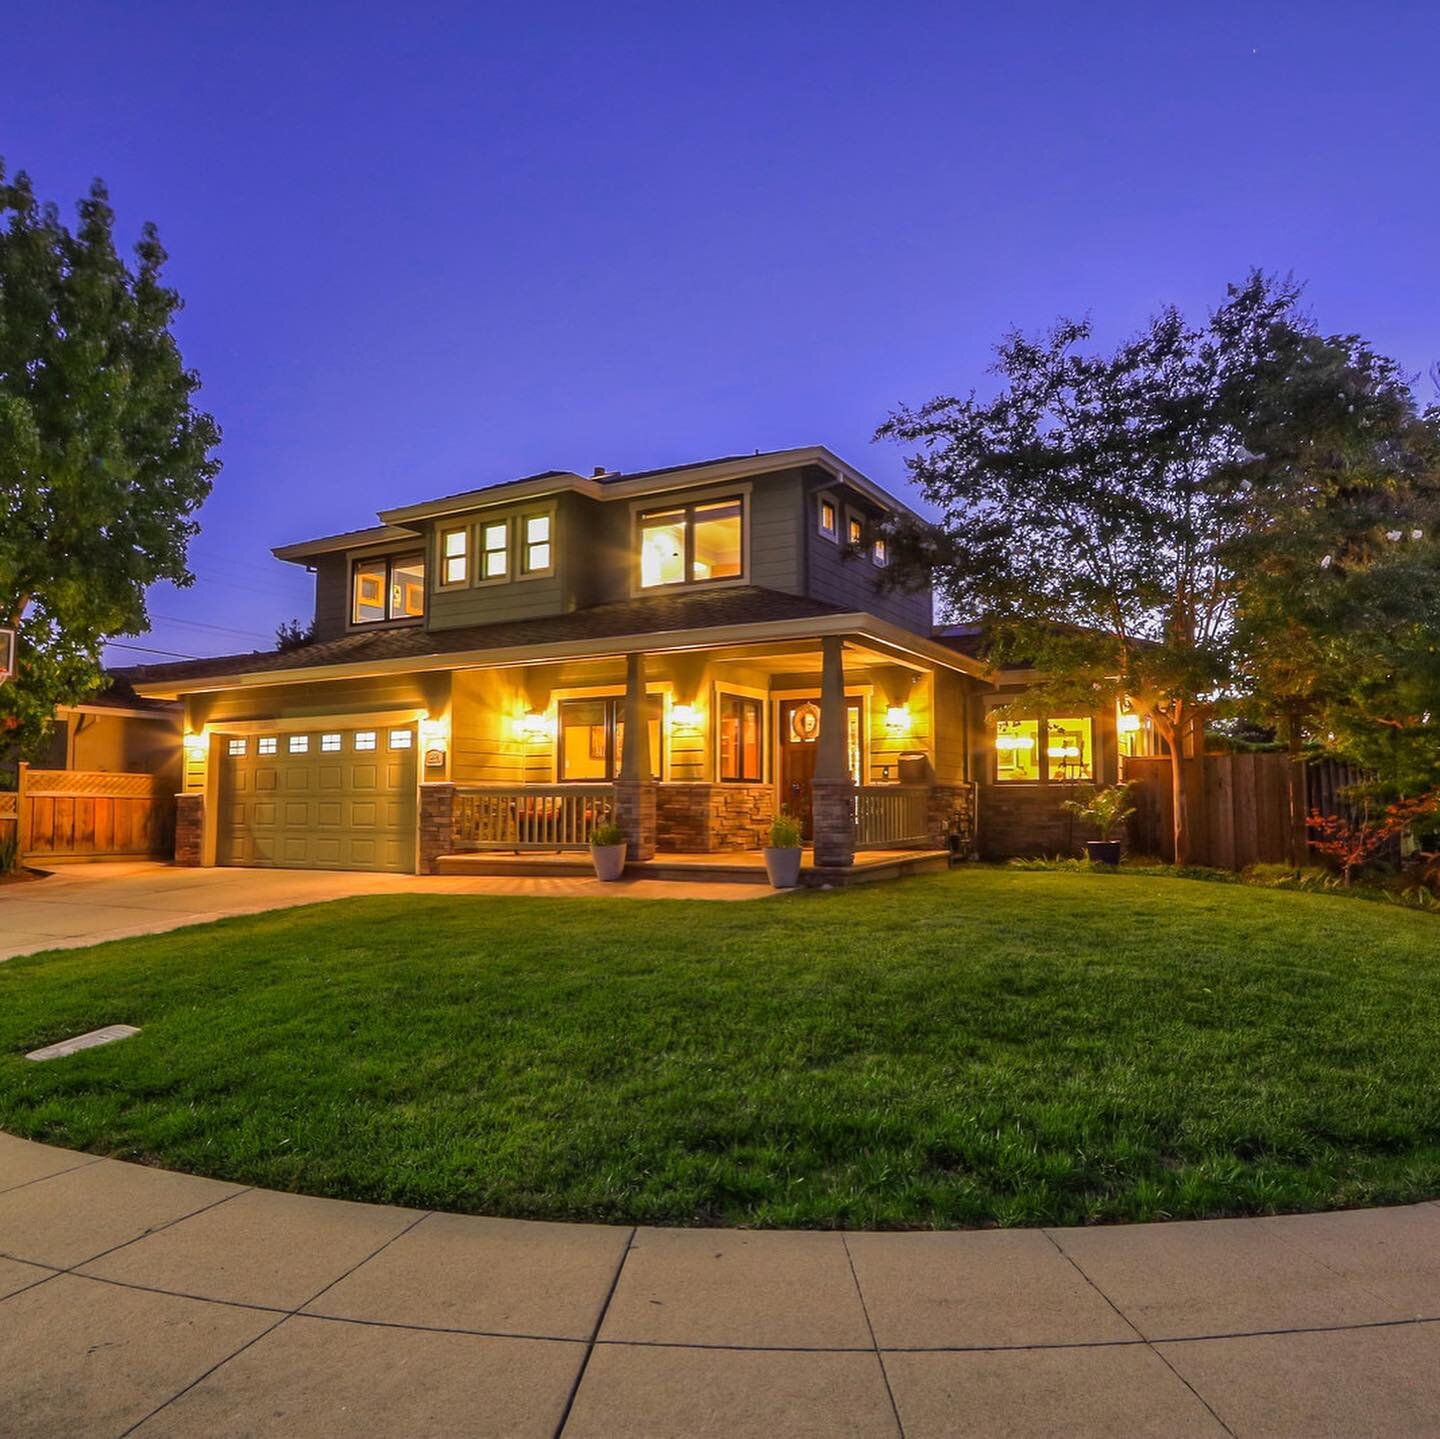 Open House:
4 🛏 | 3.5 🛁 | 2 🏎 
2,919 sq/ft | 6,177 lot
1509 Mallard Way
-
This Beautiful #Craftsman #Home is a #Custom Built Marvel! High Ceilings, Gorgeous Gourmet #Kitchen, and Stunning Backyard Space Only Adds to the Desirabilty! Don&rsquo;t Mi